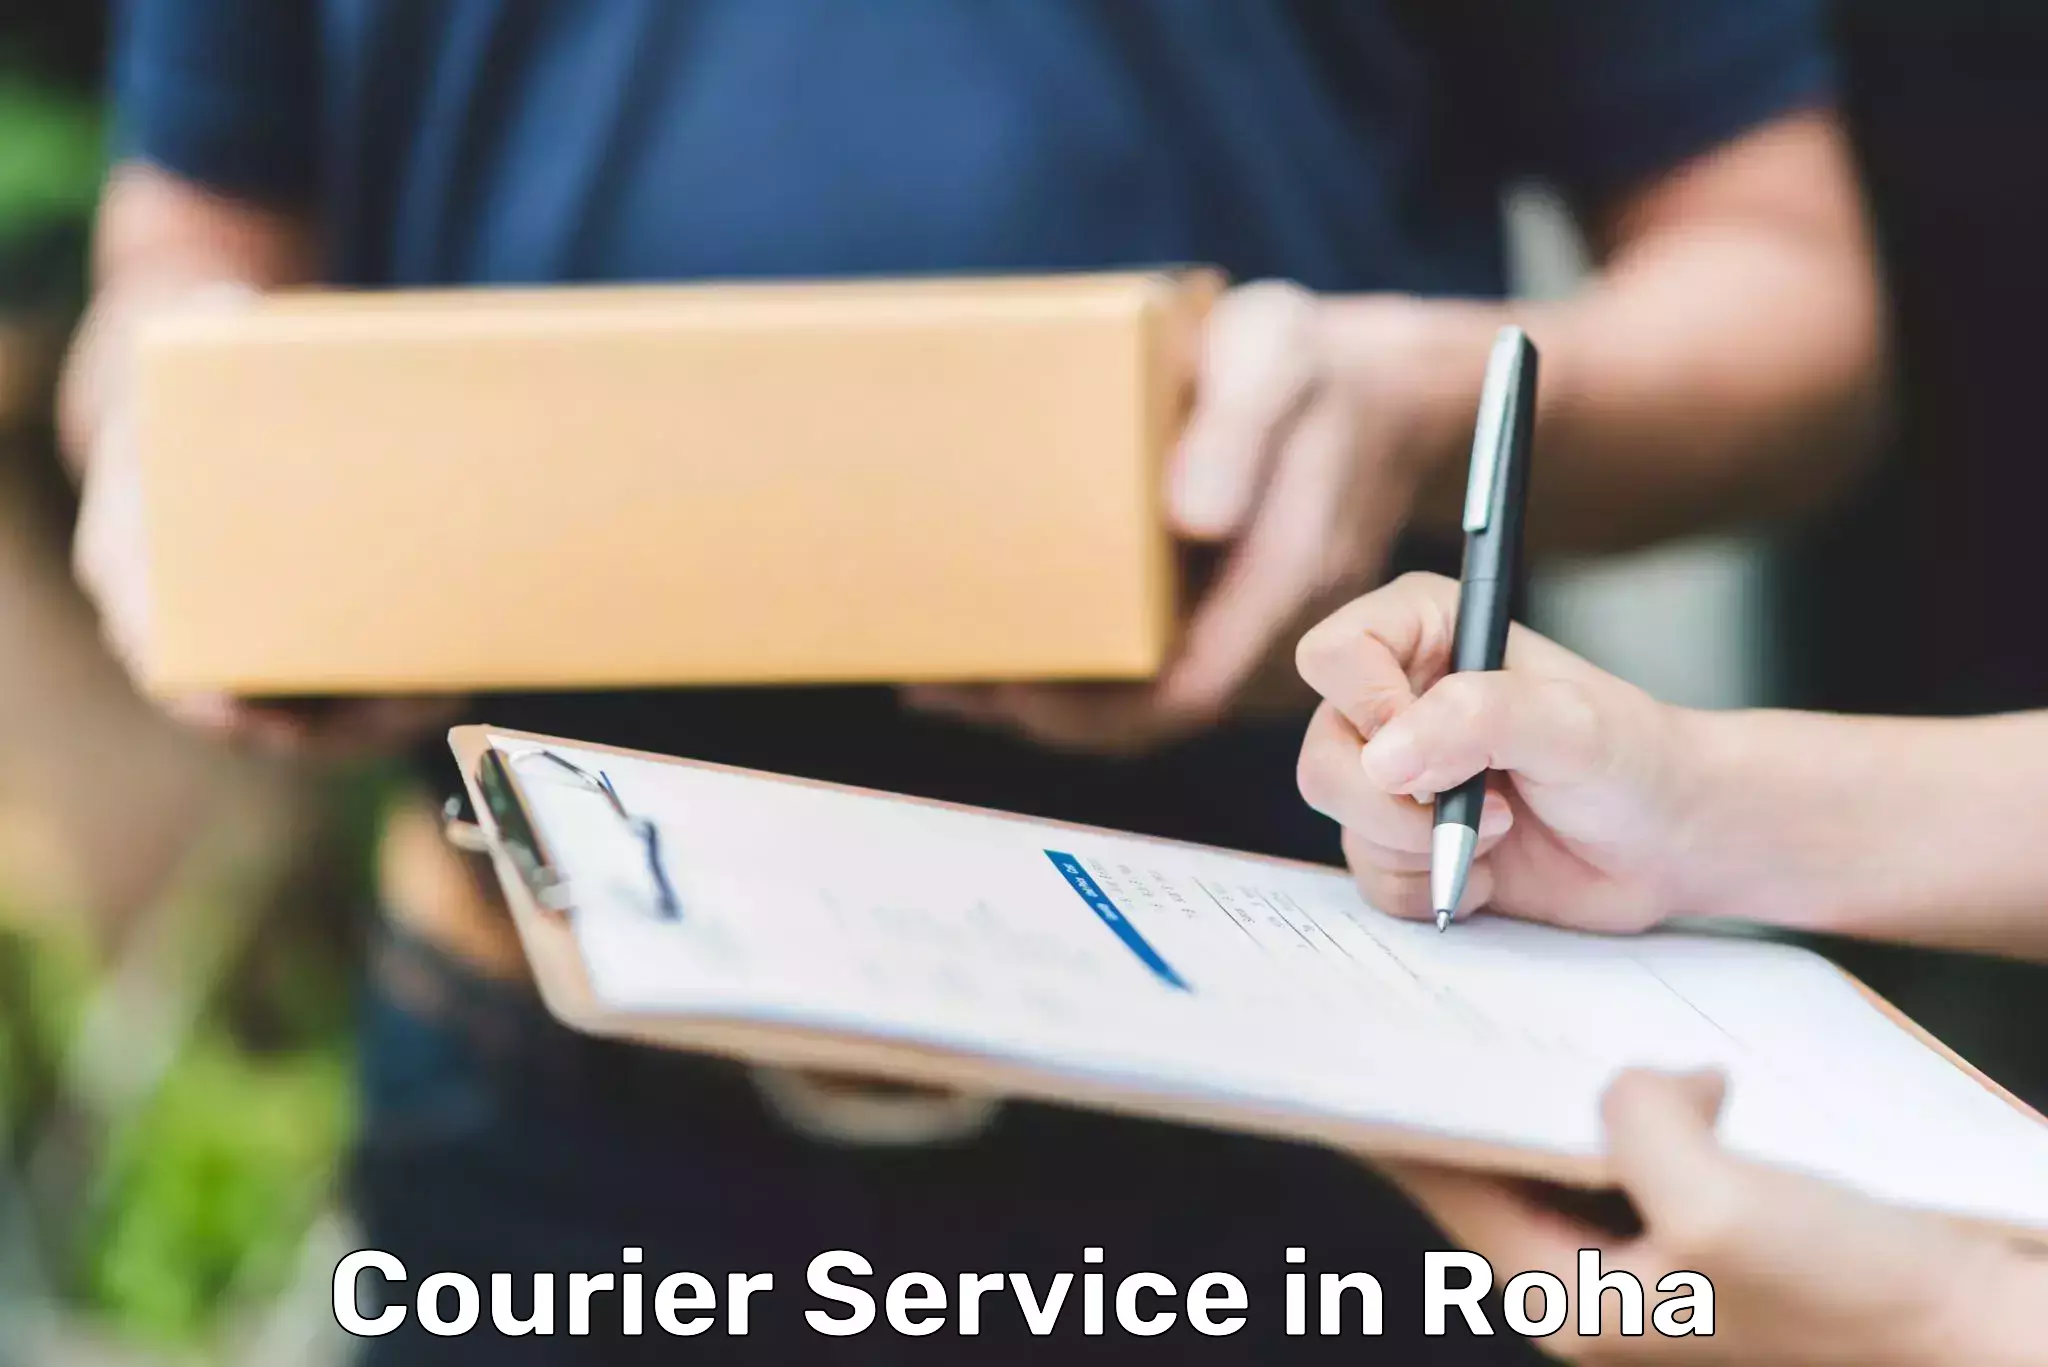 Courier service partnerships in Roha